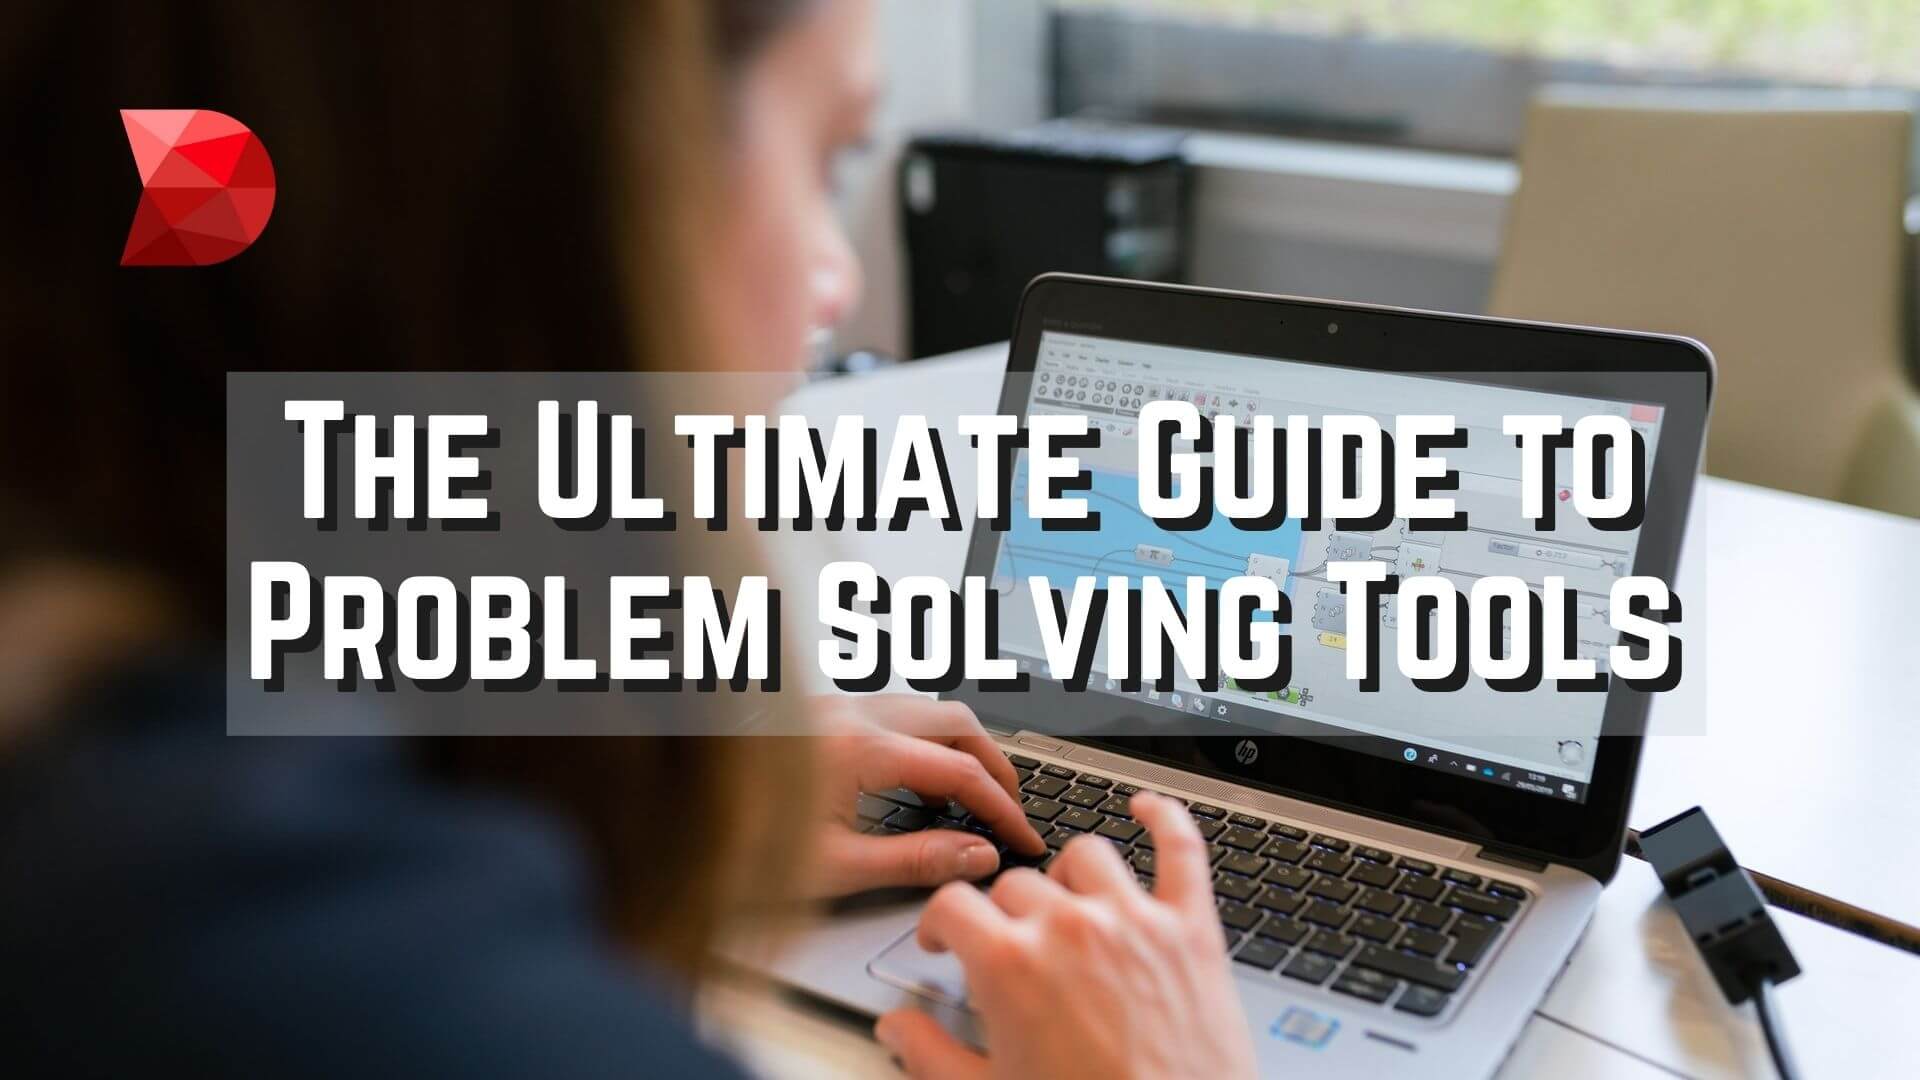 The Ultimate Guide to Problem Solving Tools